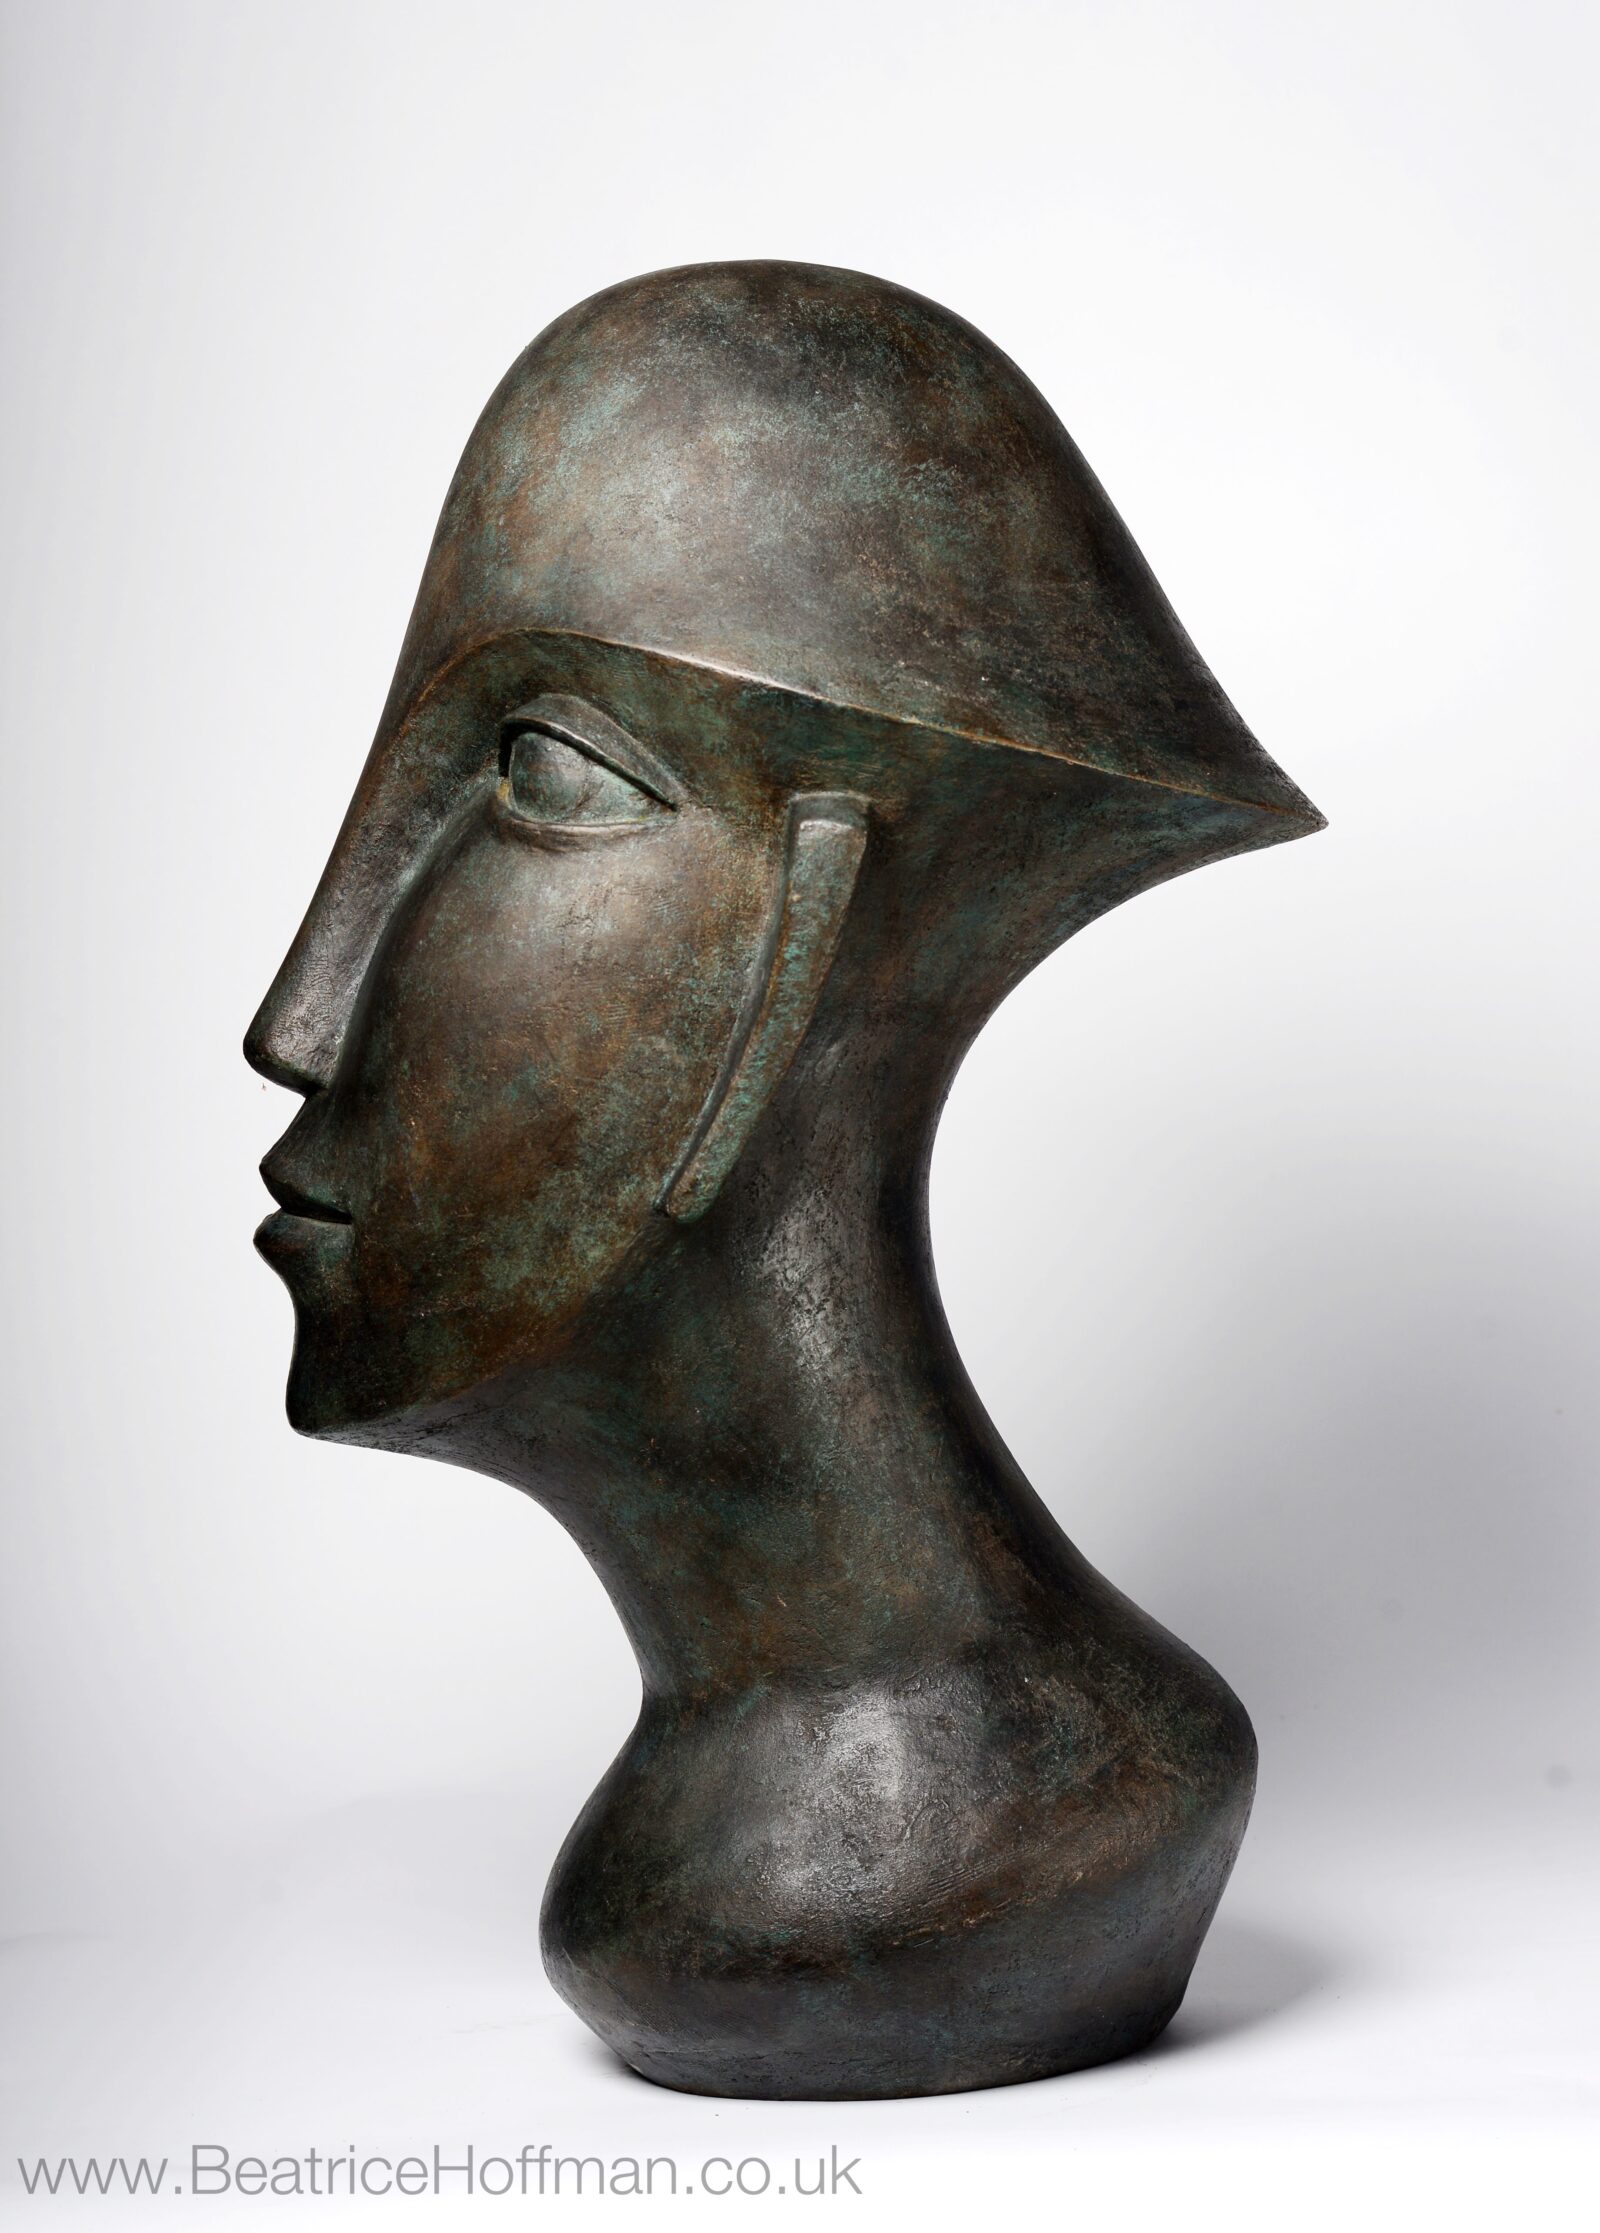 Overlarge abstract sculpture of a modern cubist head suitable as a focal point for the garden and home